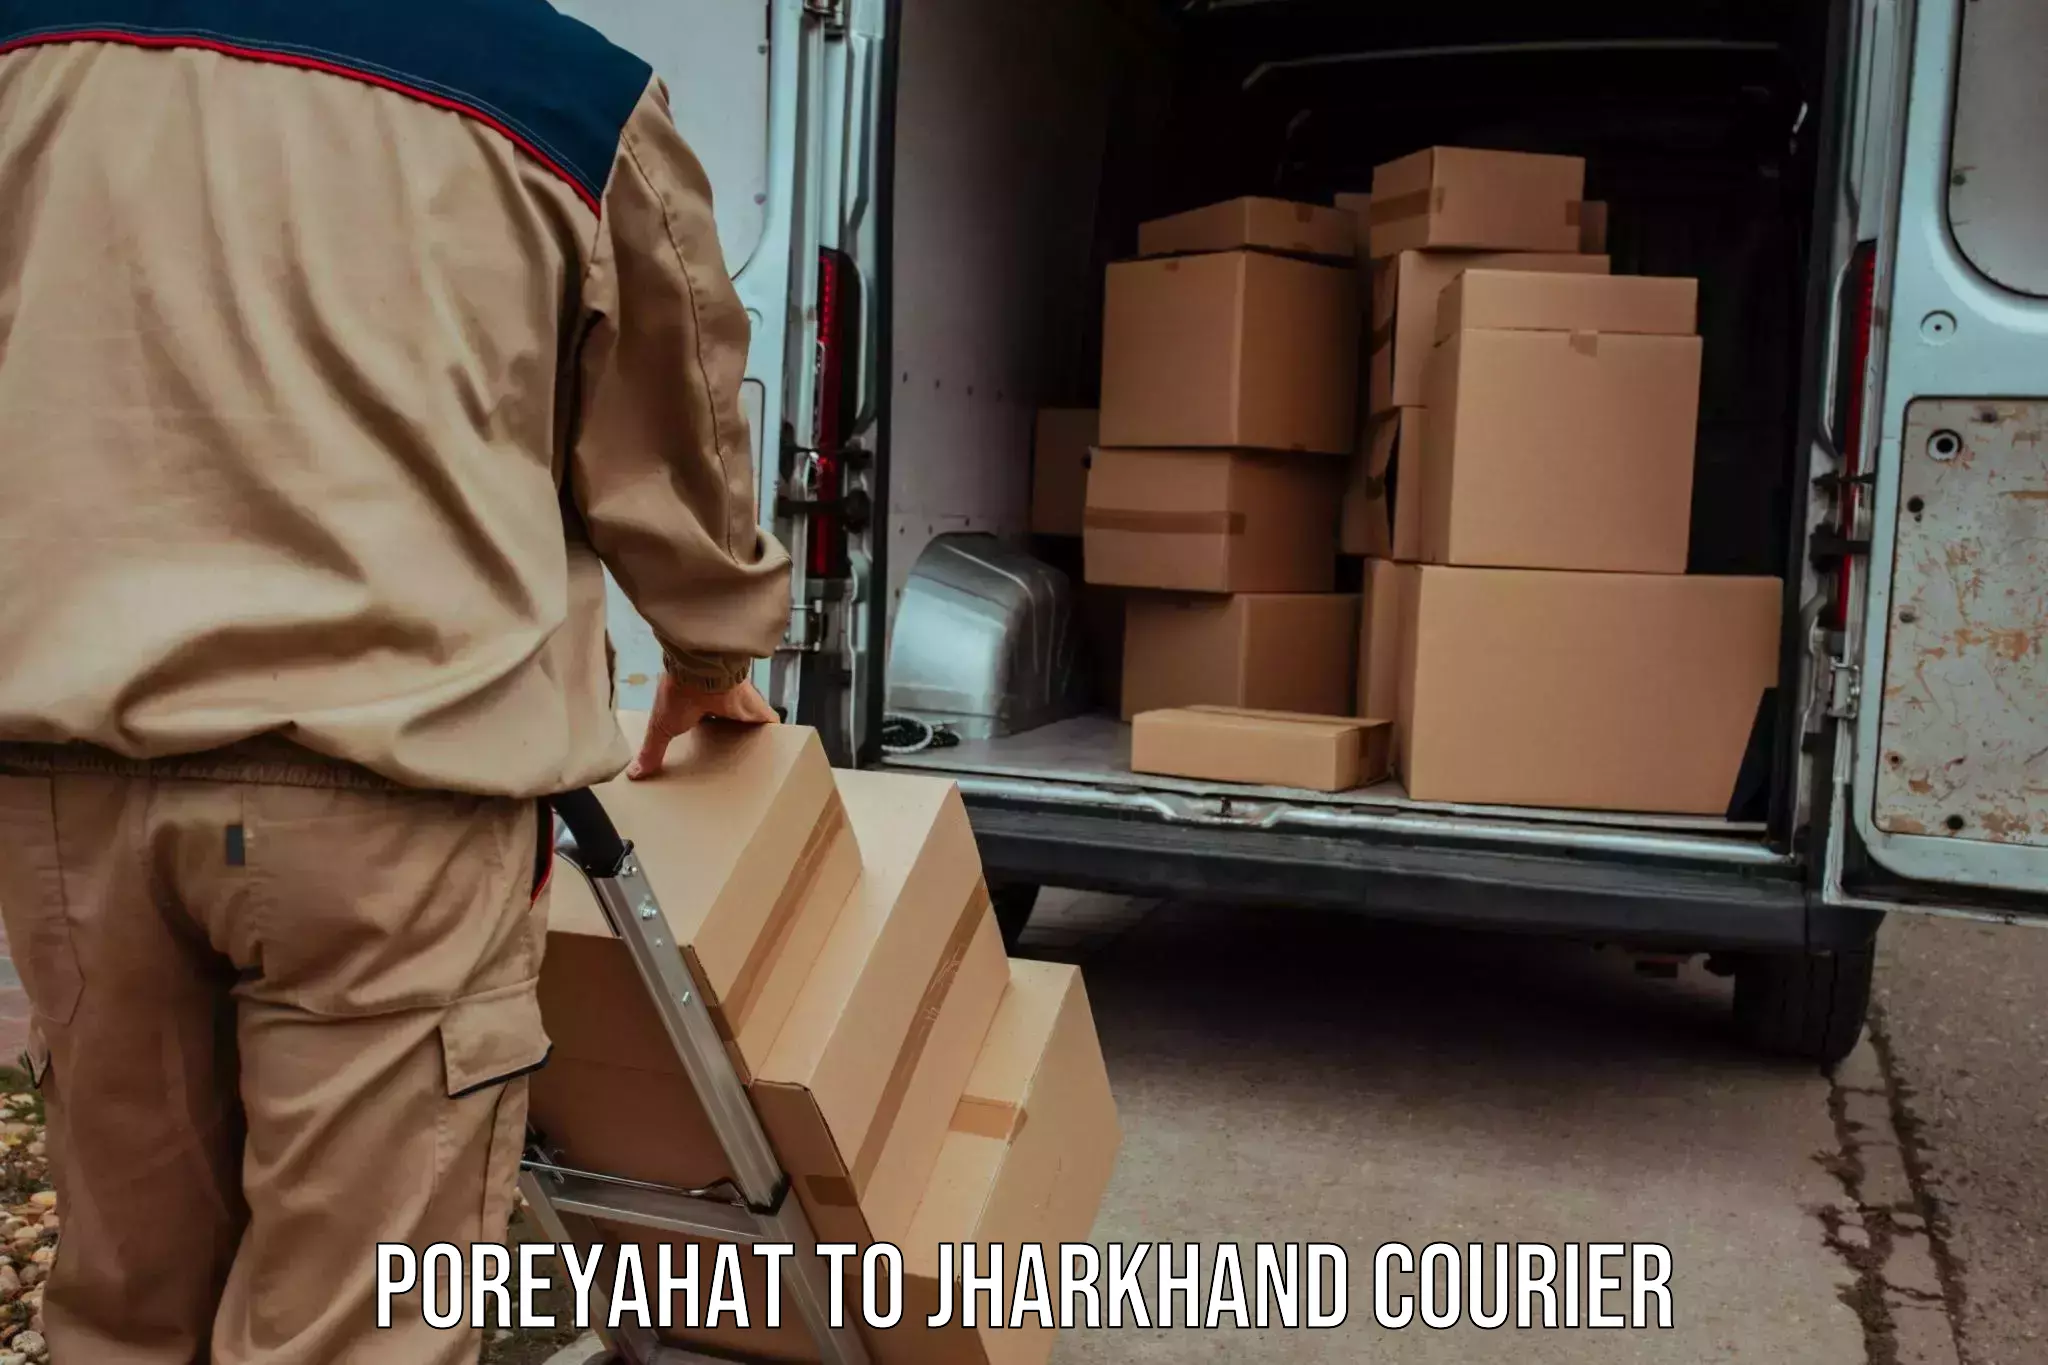 Next-day delivery options Poreyahat to Bagodar